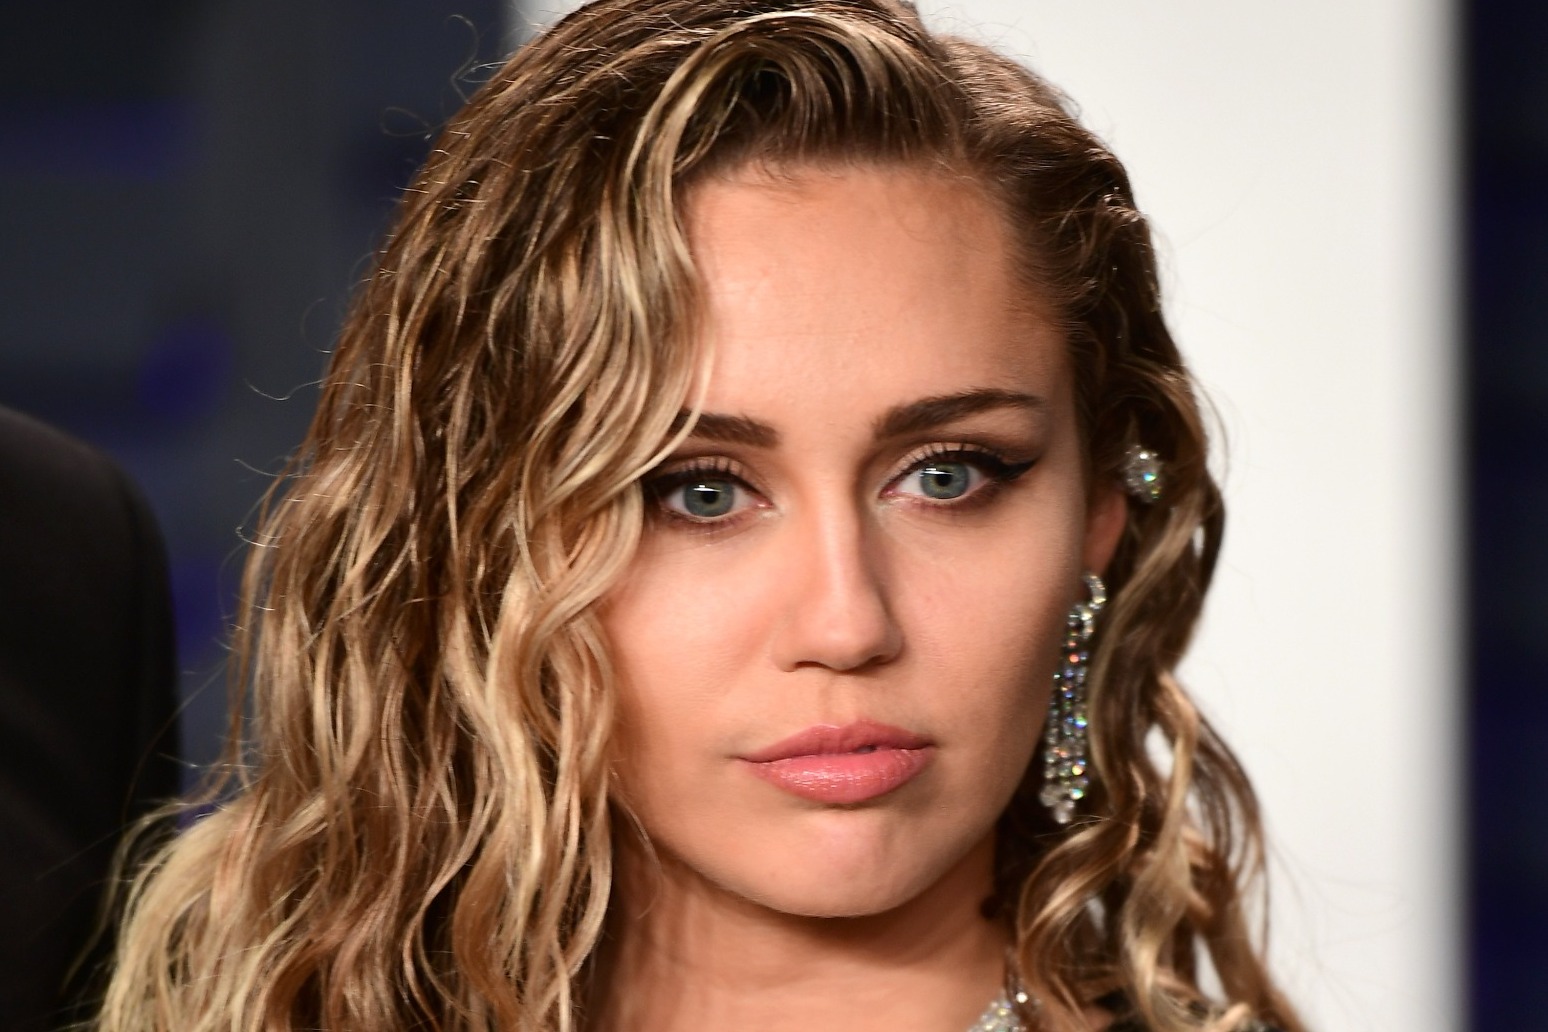 Miley Cyrus says catching Covid 19 on world tour was definitely worth it